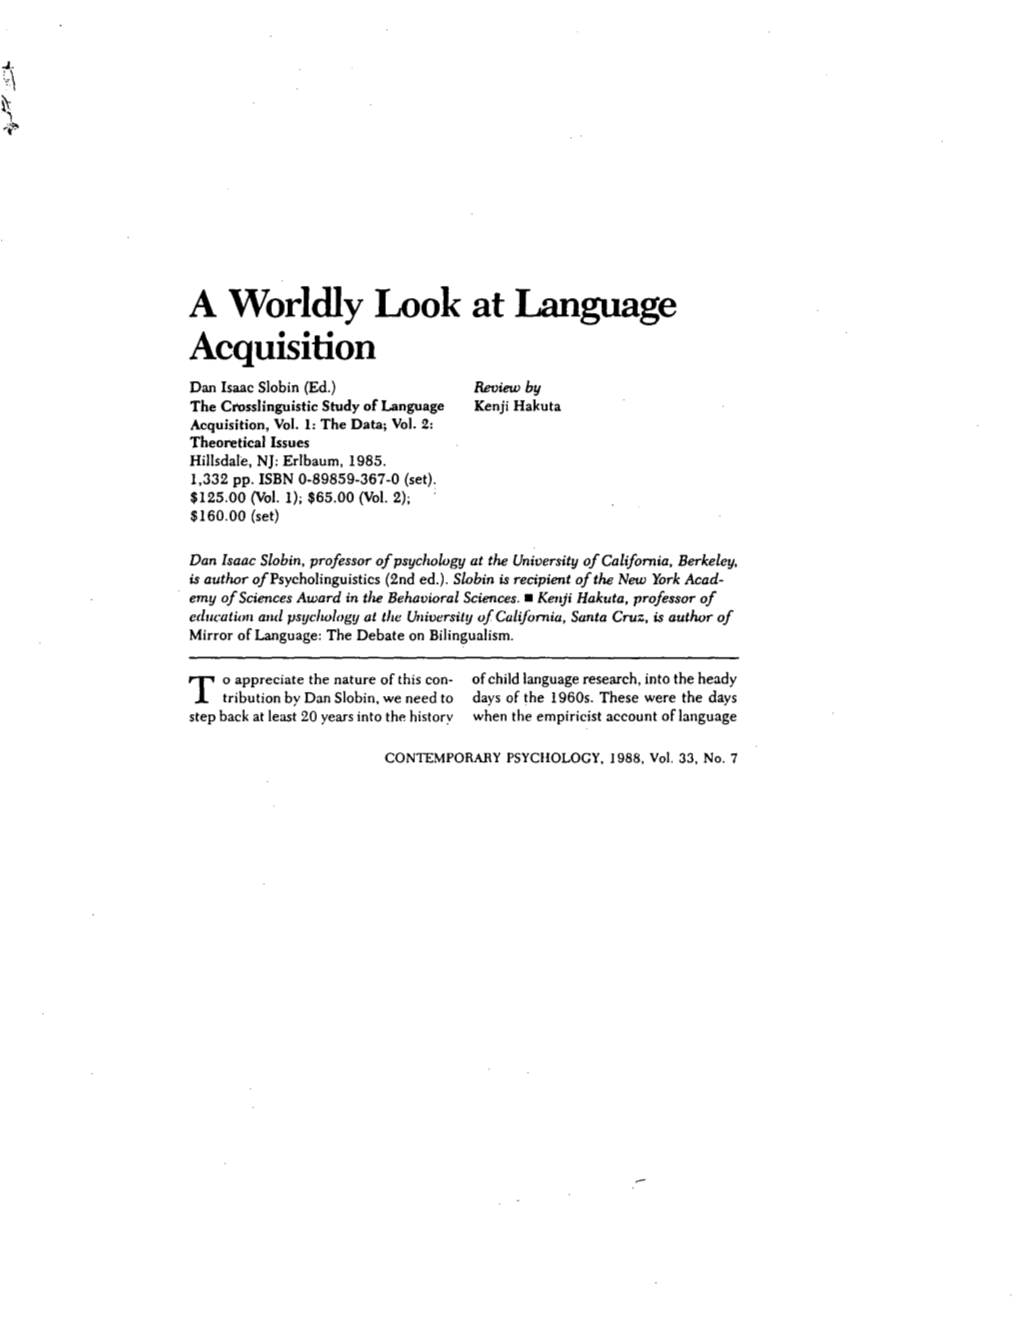 A Worldly Look at Language Acquisition Dan Isaac Slobin (Ed.) Reuiew by the Ctosslinguistic Study of Language Kenji Hakuta Acquisition, Vol